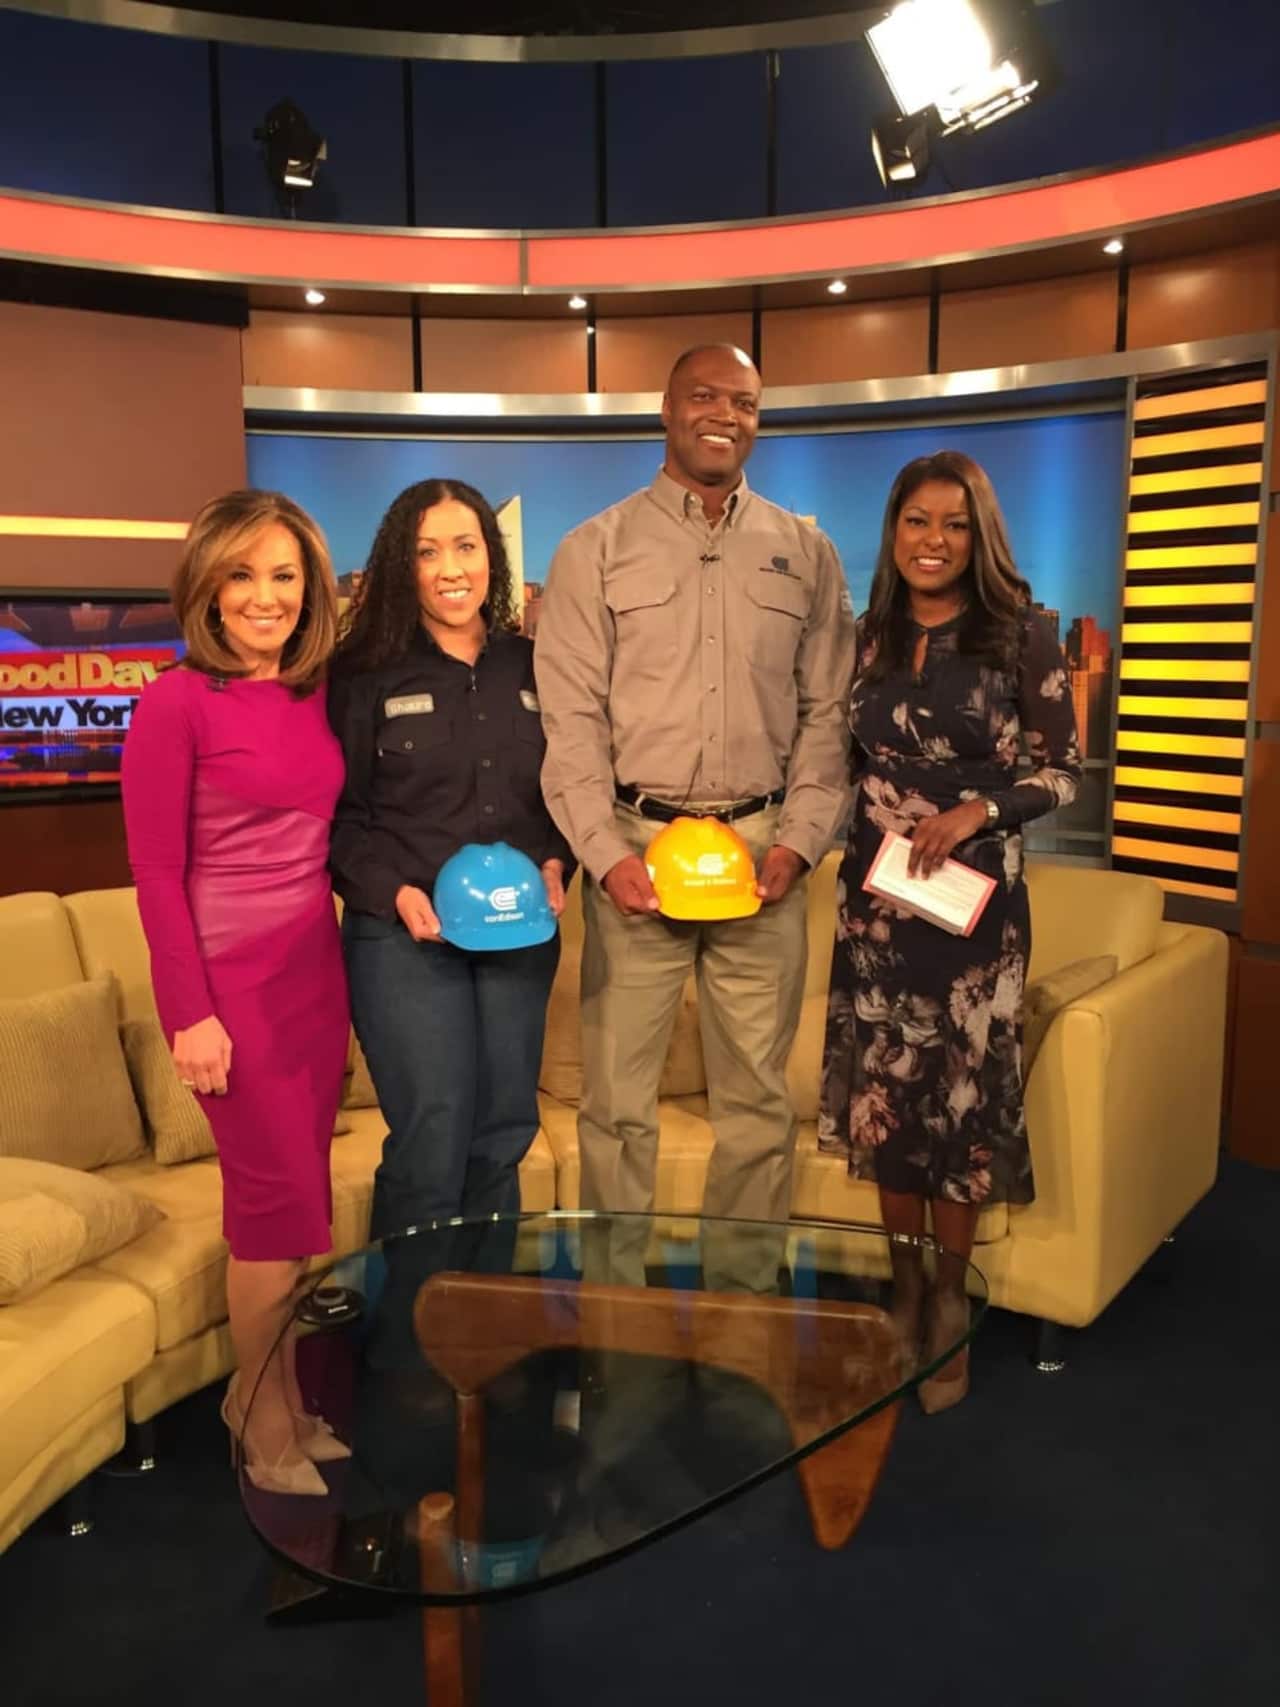 Peekskill resident Shakira Wilson (second from the left) recently appeared on Fox 5 TV “Good Day NY” describing her duties along with O&R’s Orville Cocking, who just returned from duty in Puerto Rico.